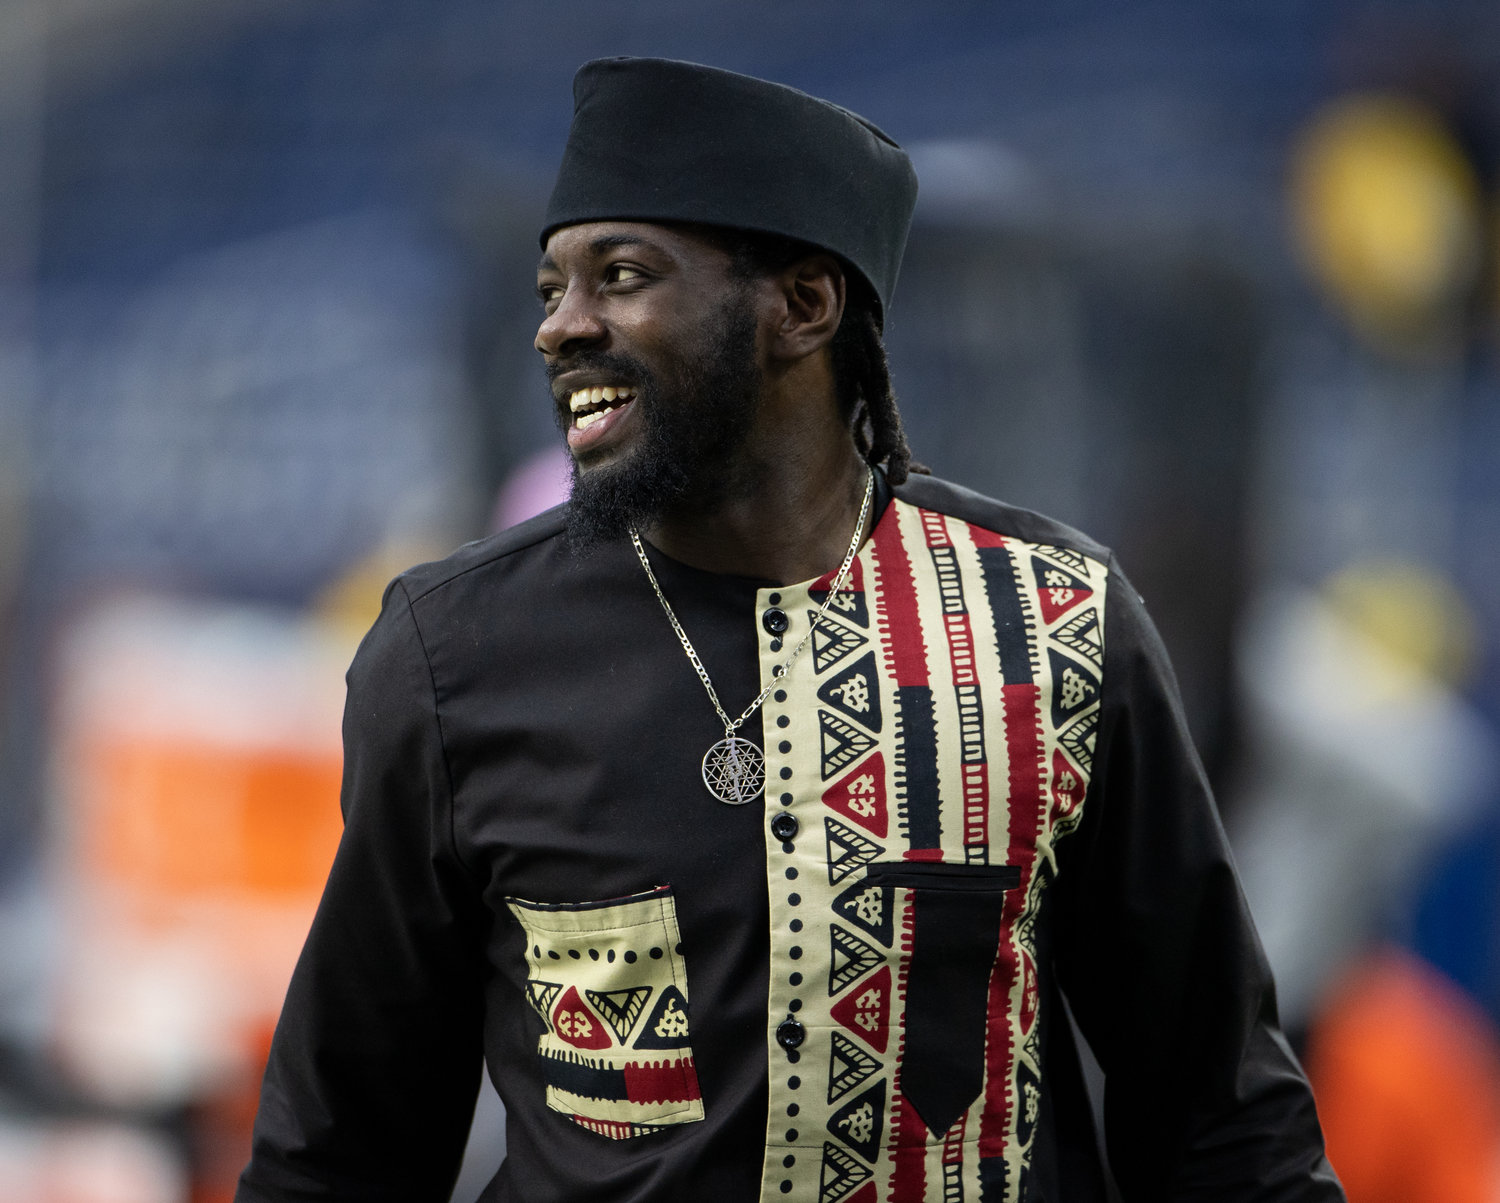 Cleveland Browns linebacker Jeremiah Owusu-Koramoah (28) arrives at NRG Stadium ahead of an NFL game between the Houston Texans and the Cleveland Browns on Dec. 4, 2022, in Houston. The Browns won, 27-14.